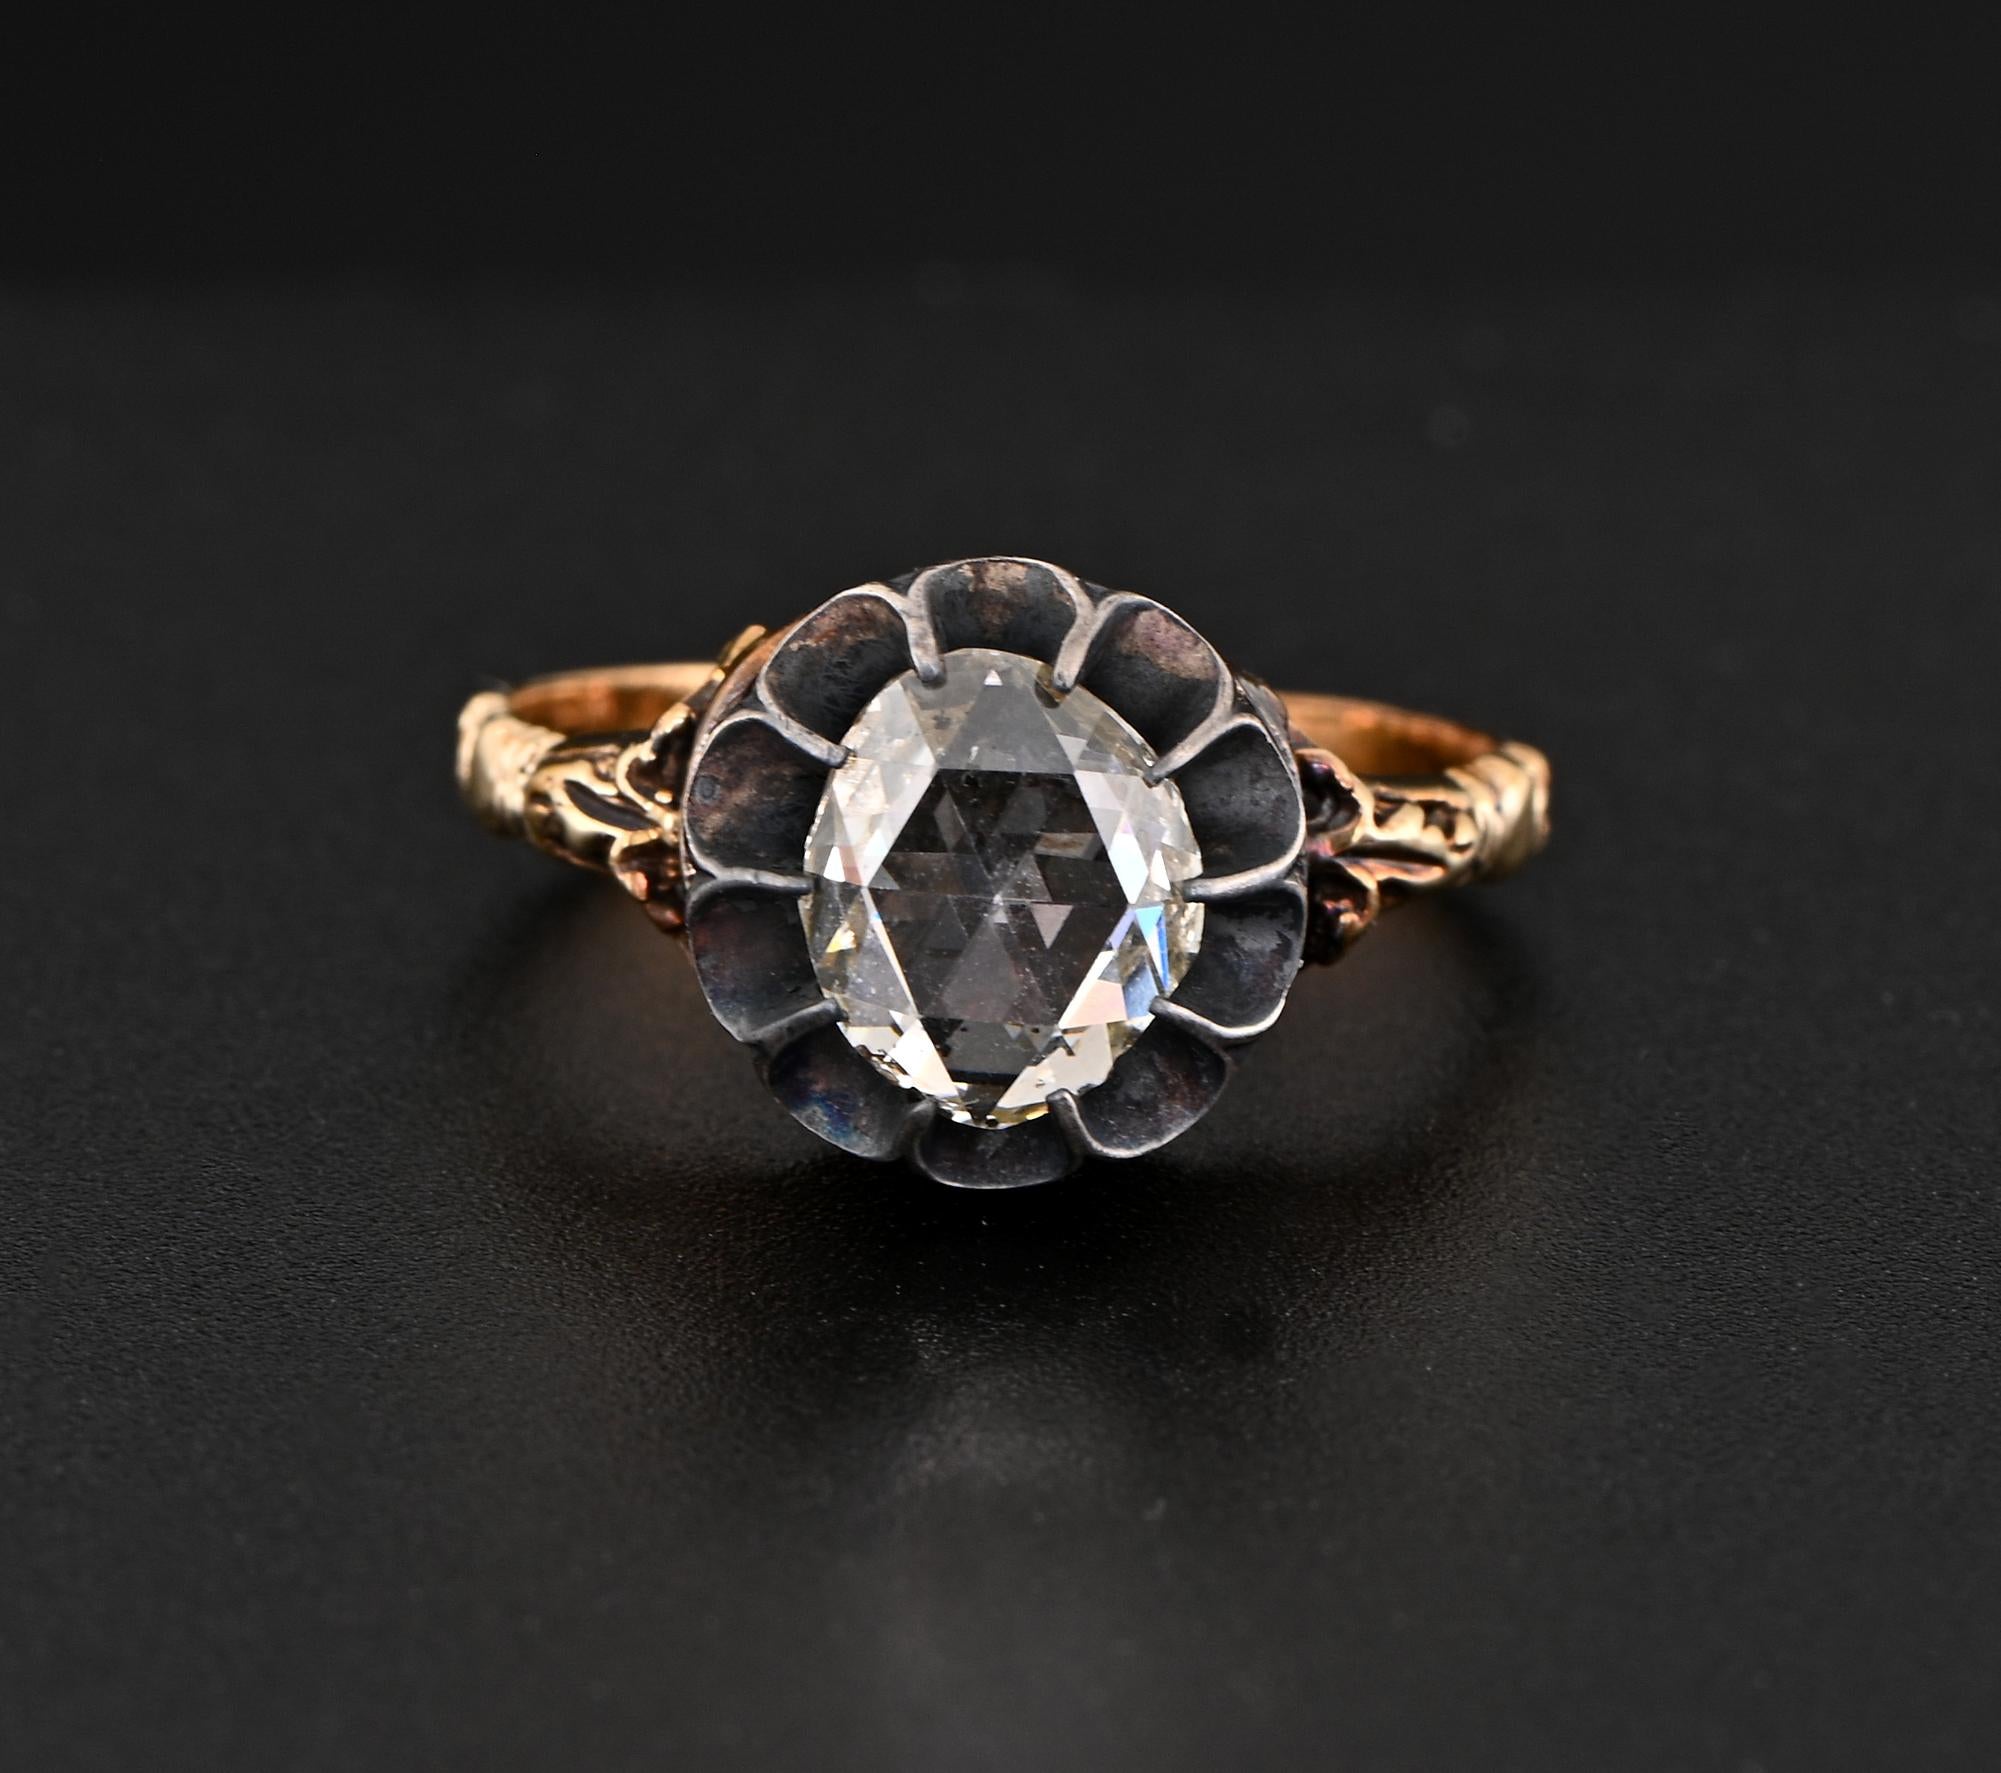 This amazing antique Diamond solitaire ring is 19th Century
Transitional between Georgian/ Victorian era, finely hand crafted at the time of solid 18 Kt gold with silver portions
Fascinating elaborate slim shank with gorgeous carved side details and